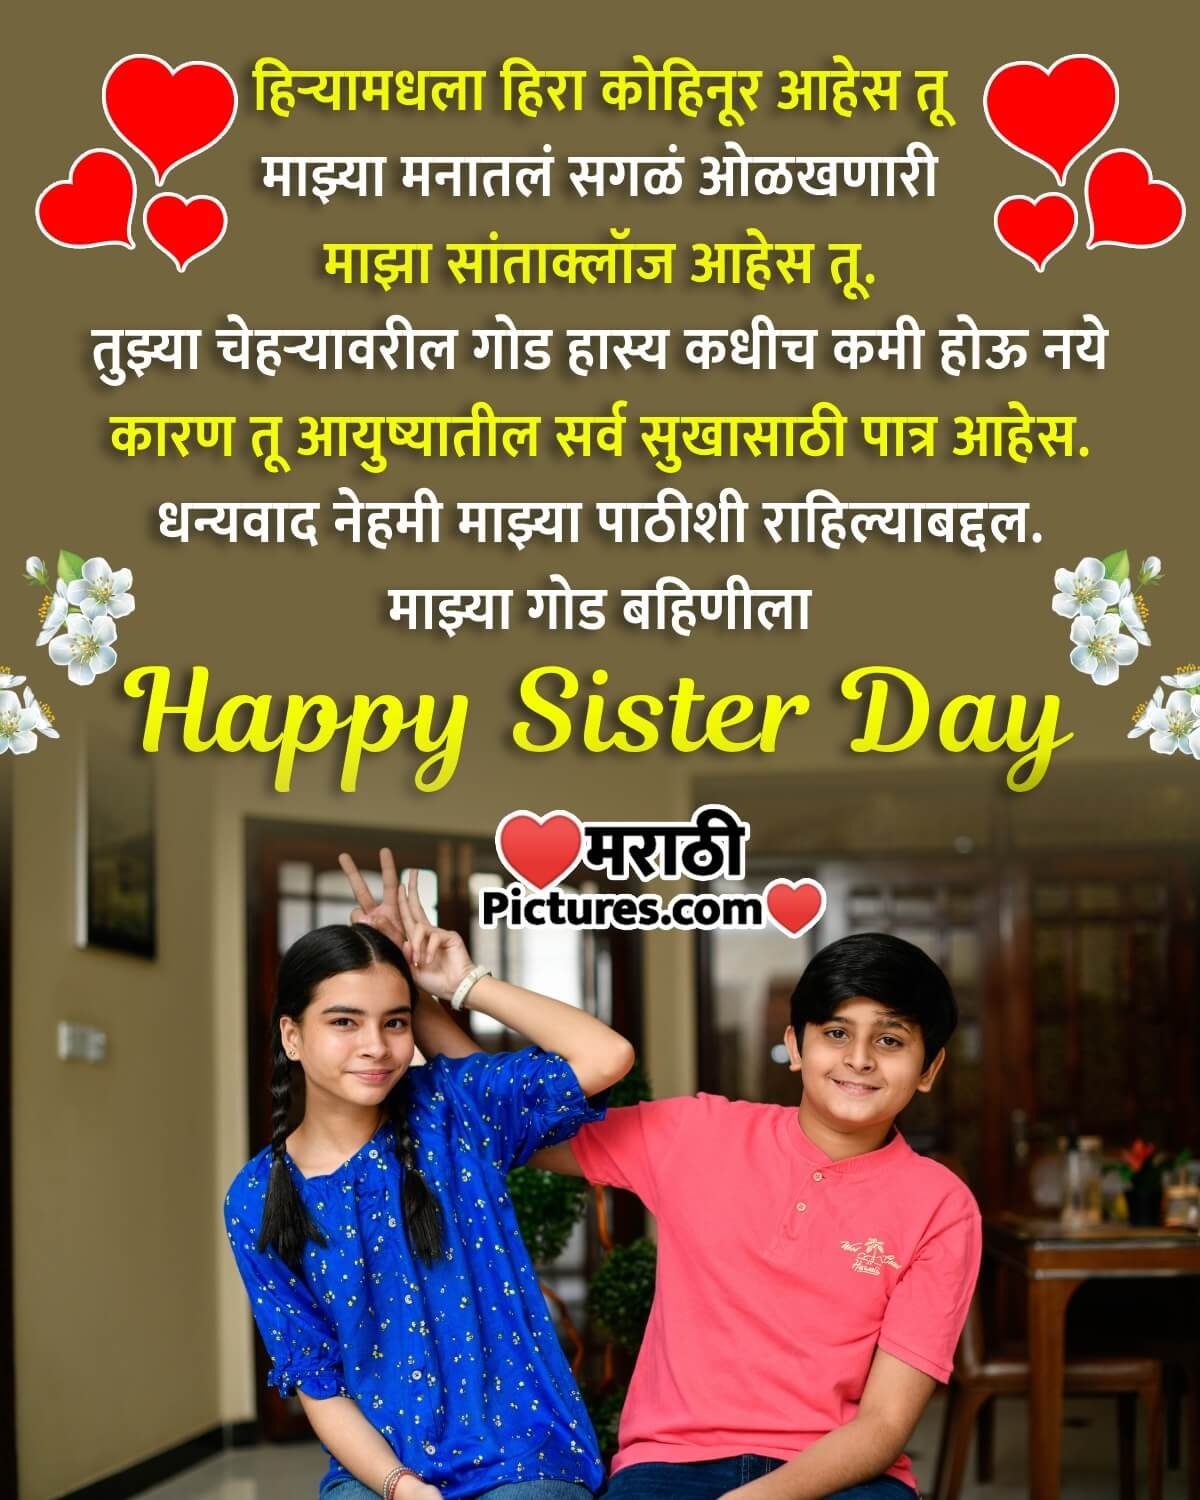 Happy Sisters Day Wishes In Marathi